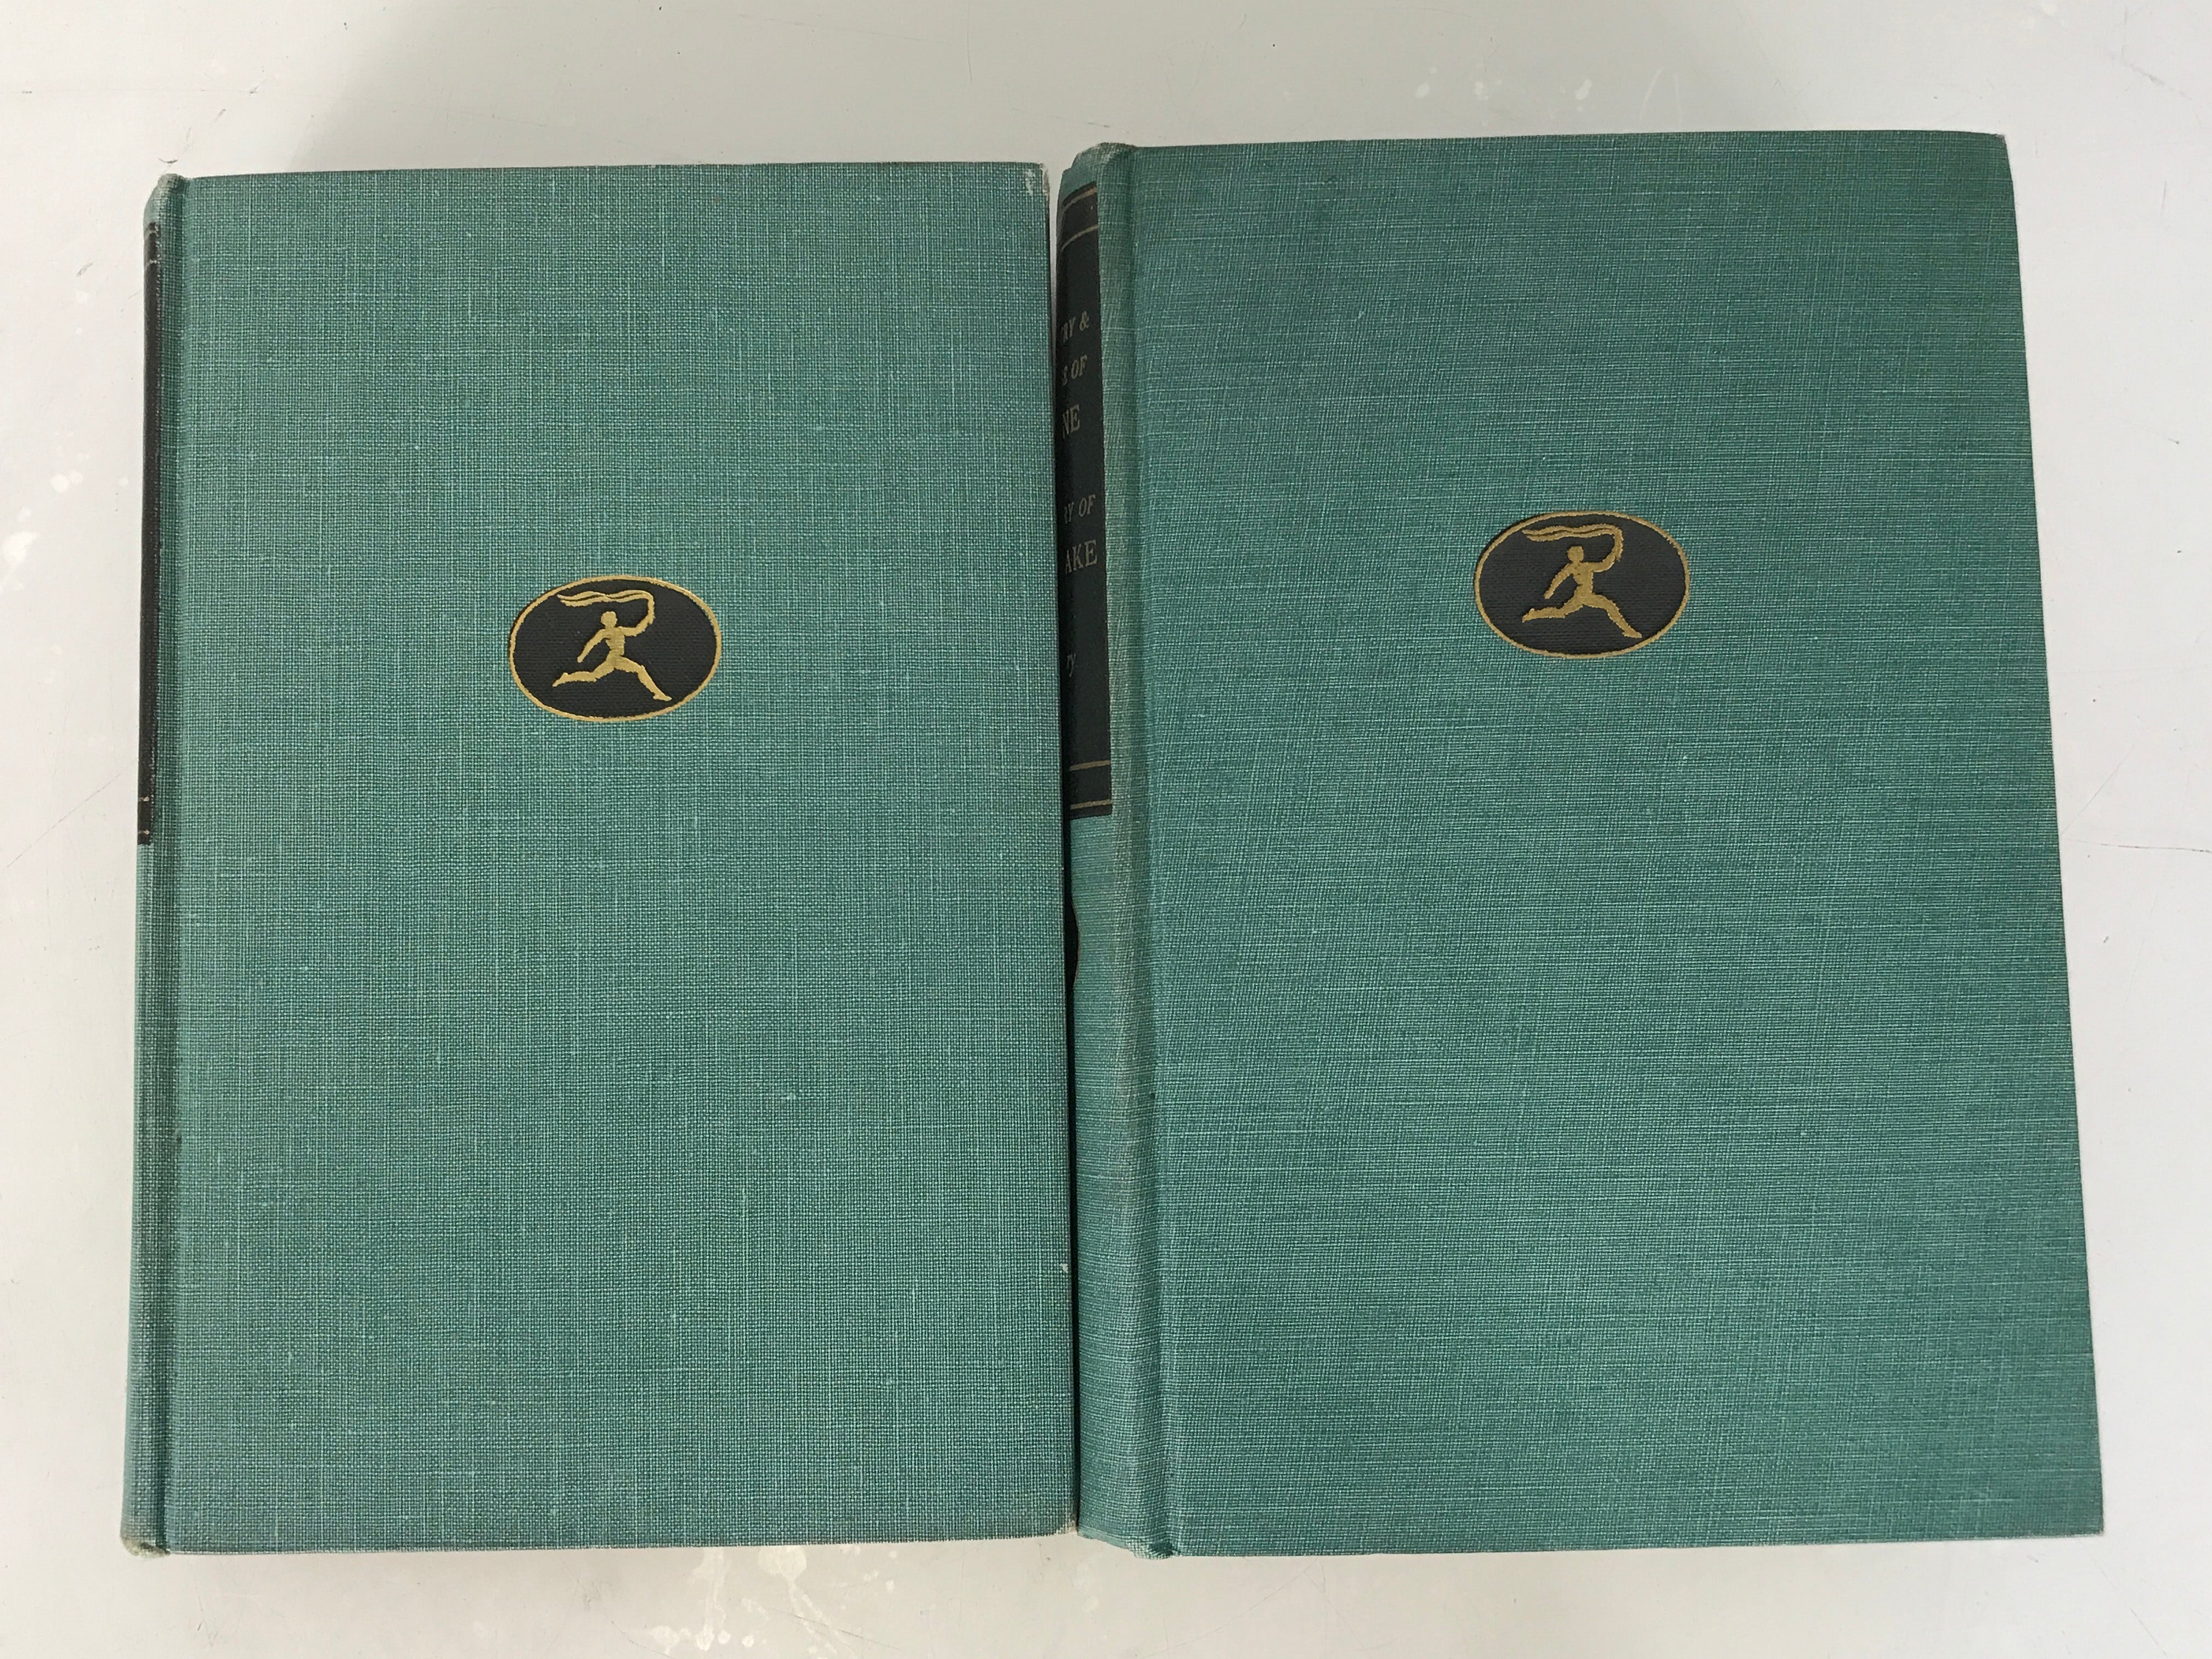 Lot of 2 Modern Library Classics: Bulfinch's Mythology and Poetry and Prose of John Donne and William Blake 1941 HC